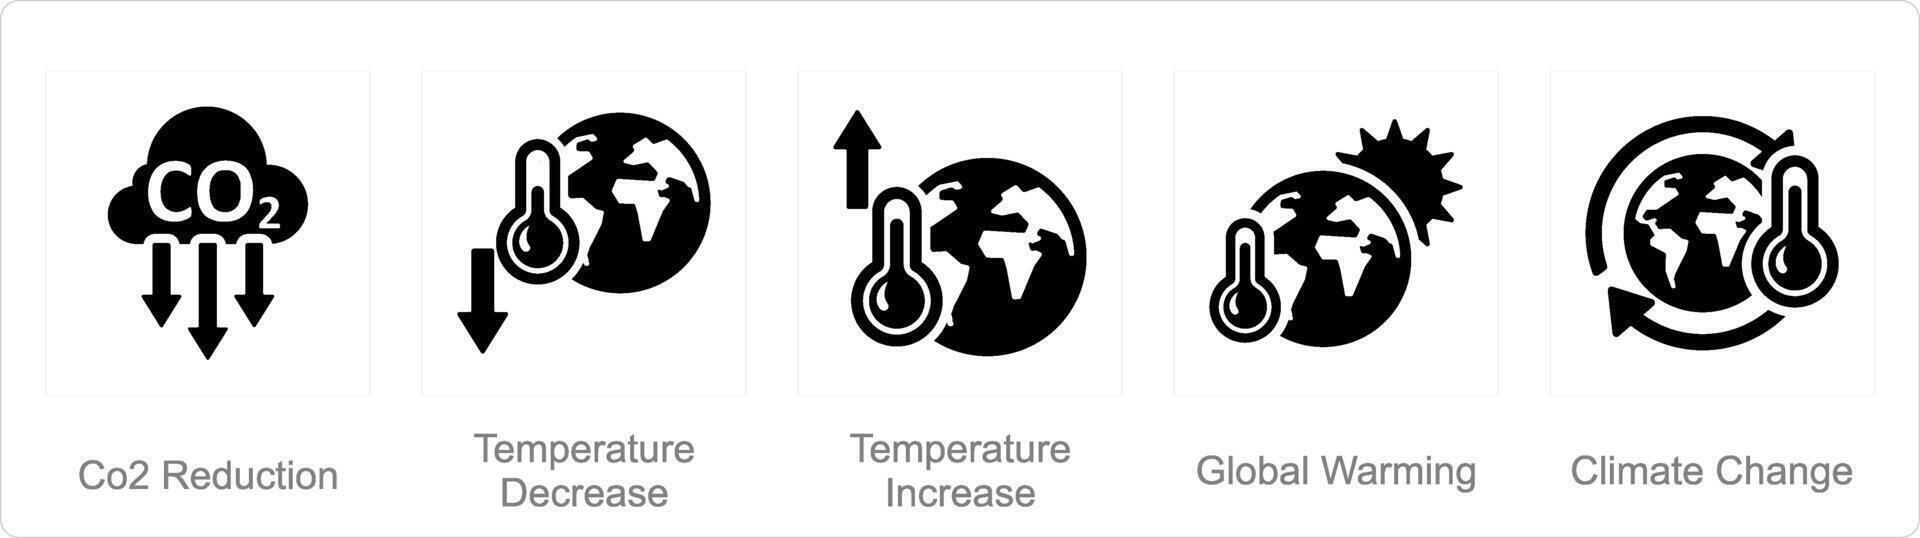 A set of 5 climate change icons as co2 reduction, temperature decrease, temperature increase vector